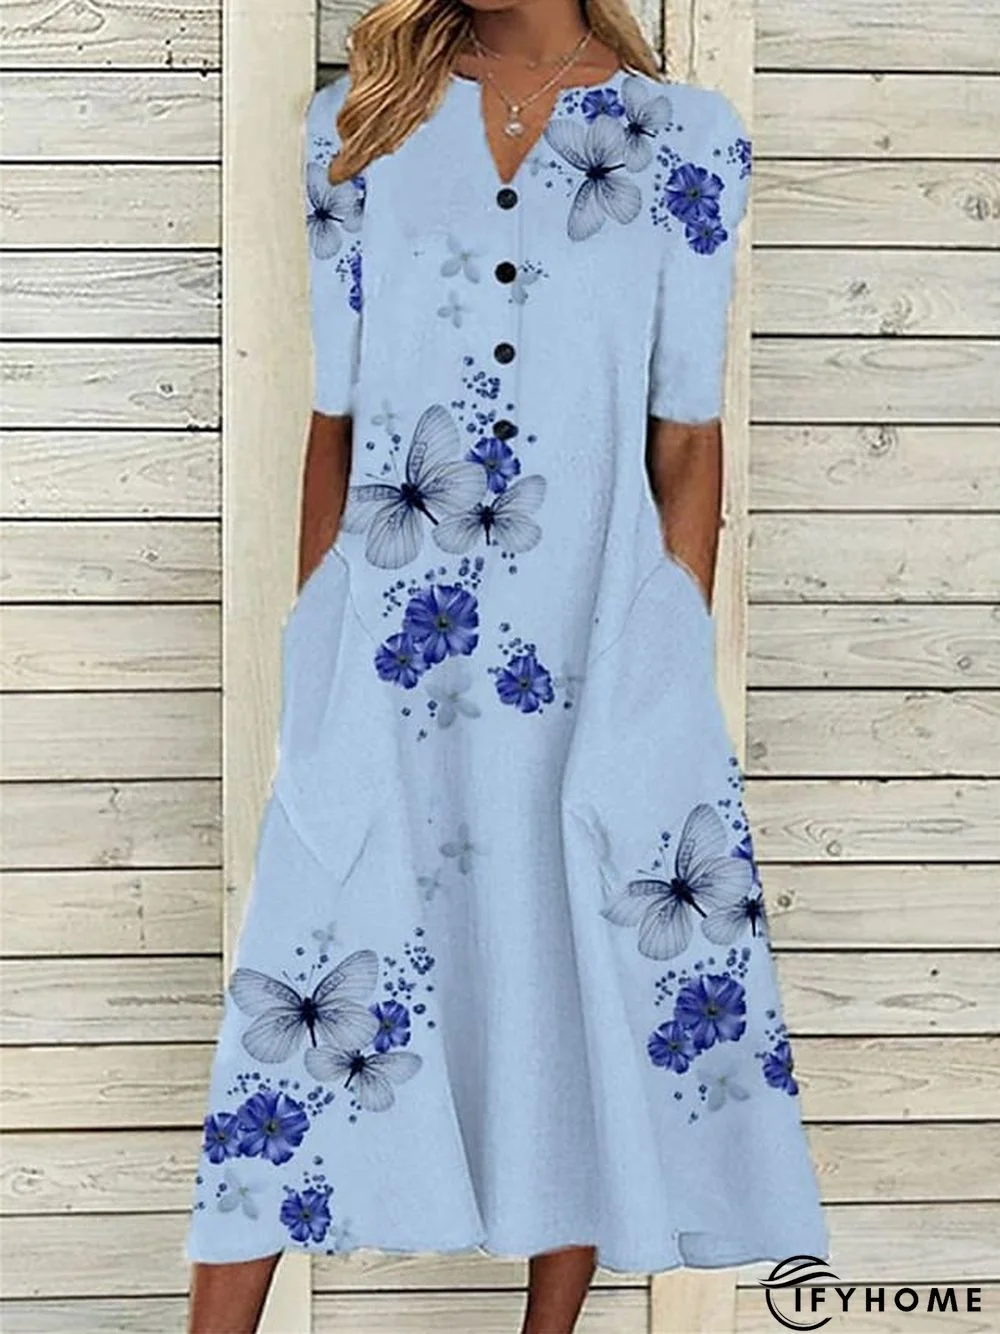 Women's Casual Dress Print Dress Loose Dress Floral Pocket Print V Neck Midi Dress Active Fashion Outdoor Daily Short Sleeve Loose Fit Black White Light Green Spring Summer S M L XL XXL | IFYHOME